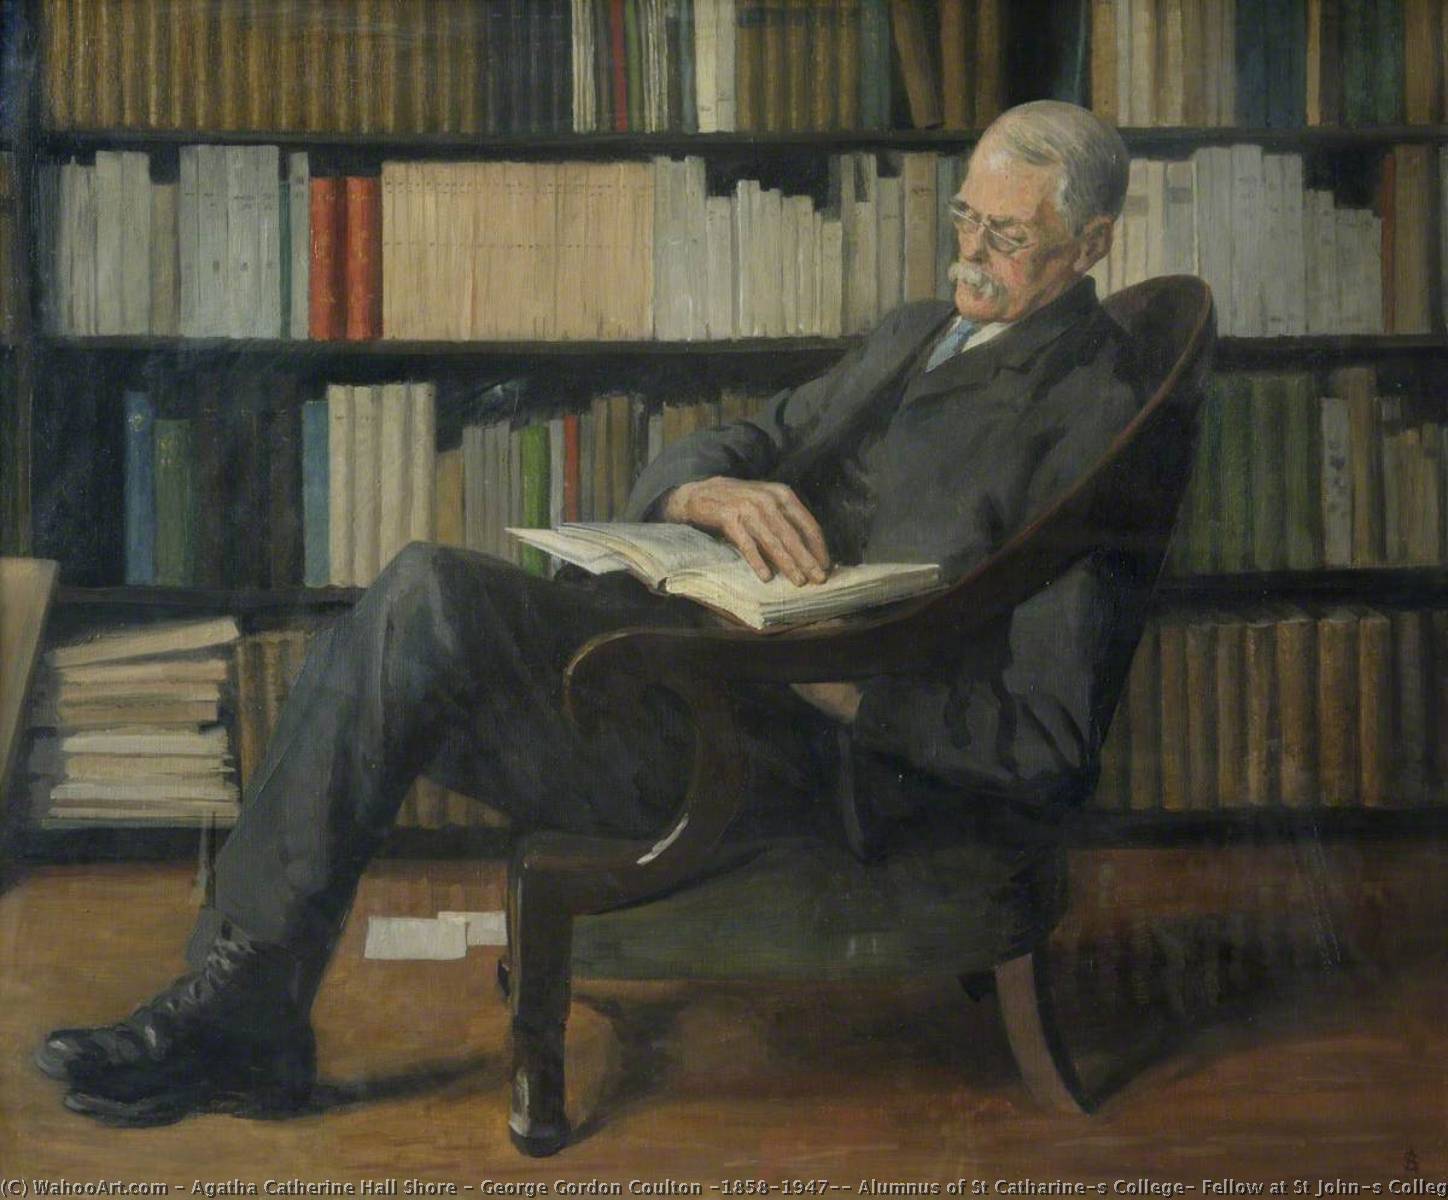 George Gordon Coulton (1858–1947), Alumnus of St Catharine’s College, Fellow at St John’s College, Deacon and Priest, 1926 by Agatha Catherine Hall Shore Agatha Catherine Hall Shore | ArtsDot.com